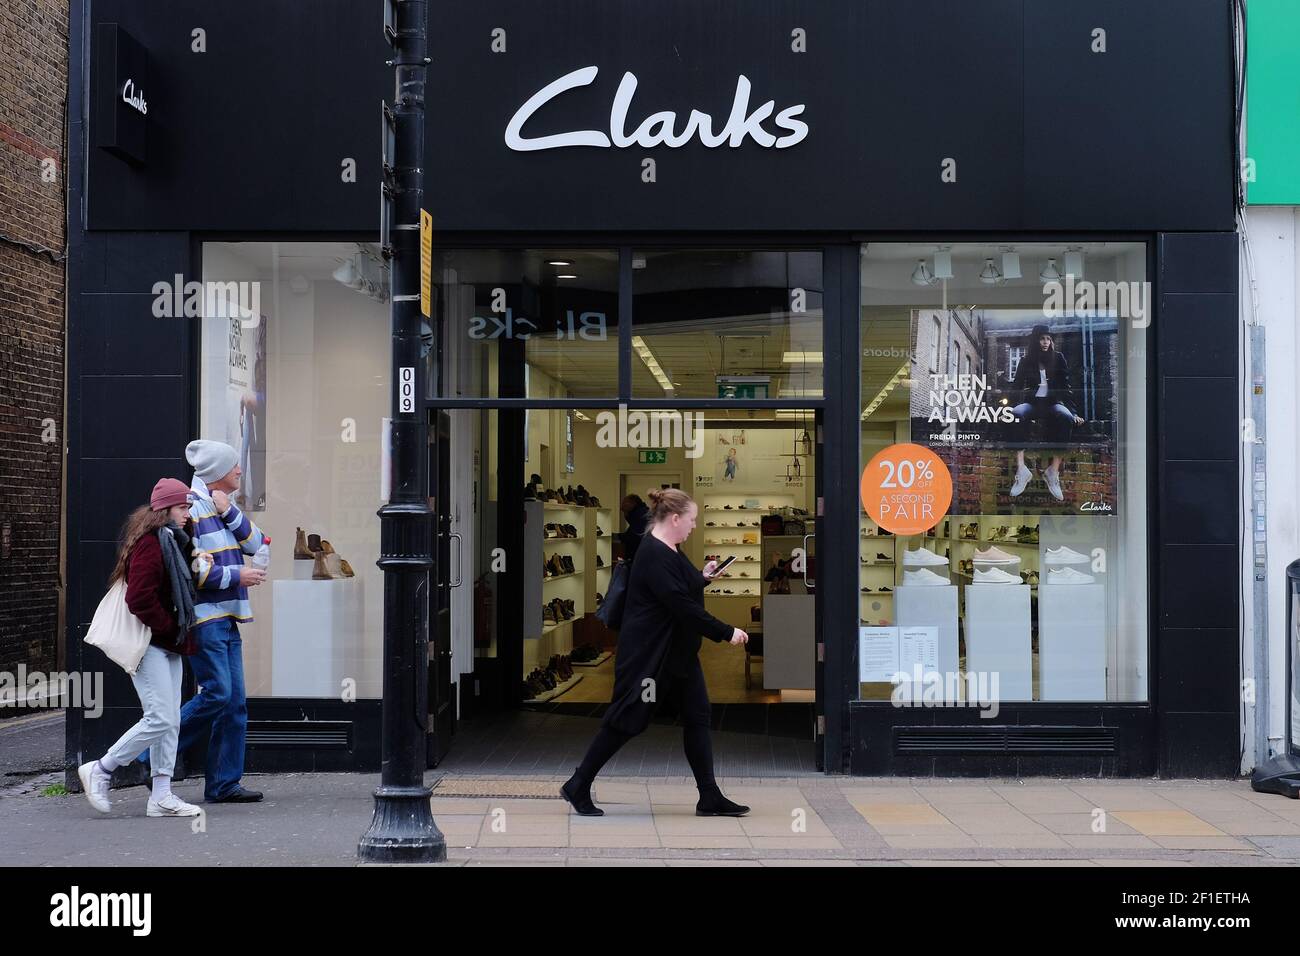 A general view of a Clarks store in Wimbledon. Photo credit should read:  Katie Collins/EMPICS/Alamy Stock Photo - Alamy